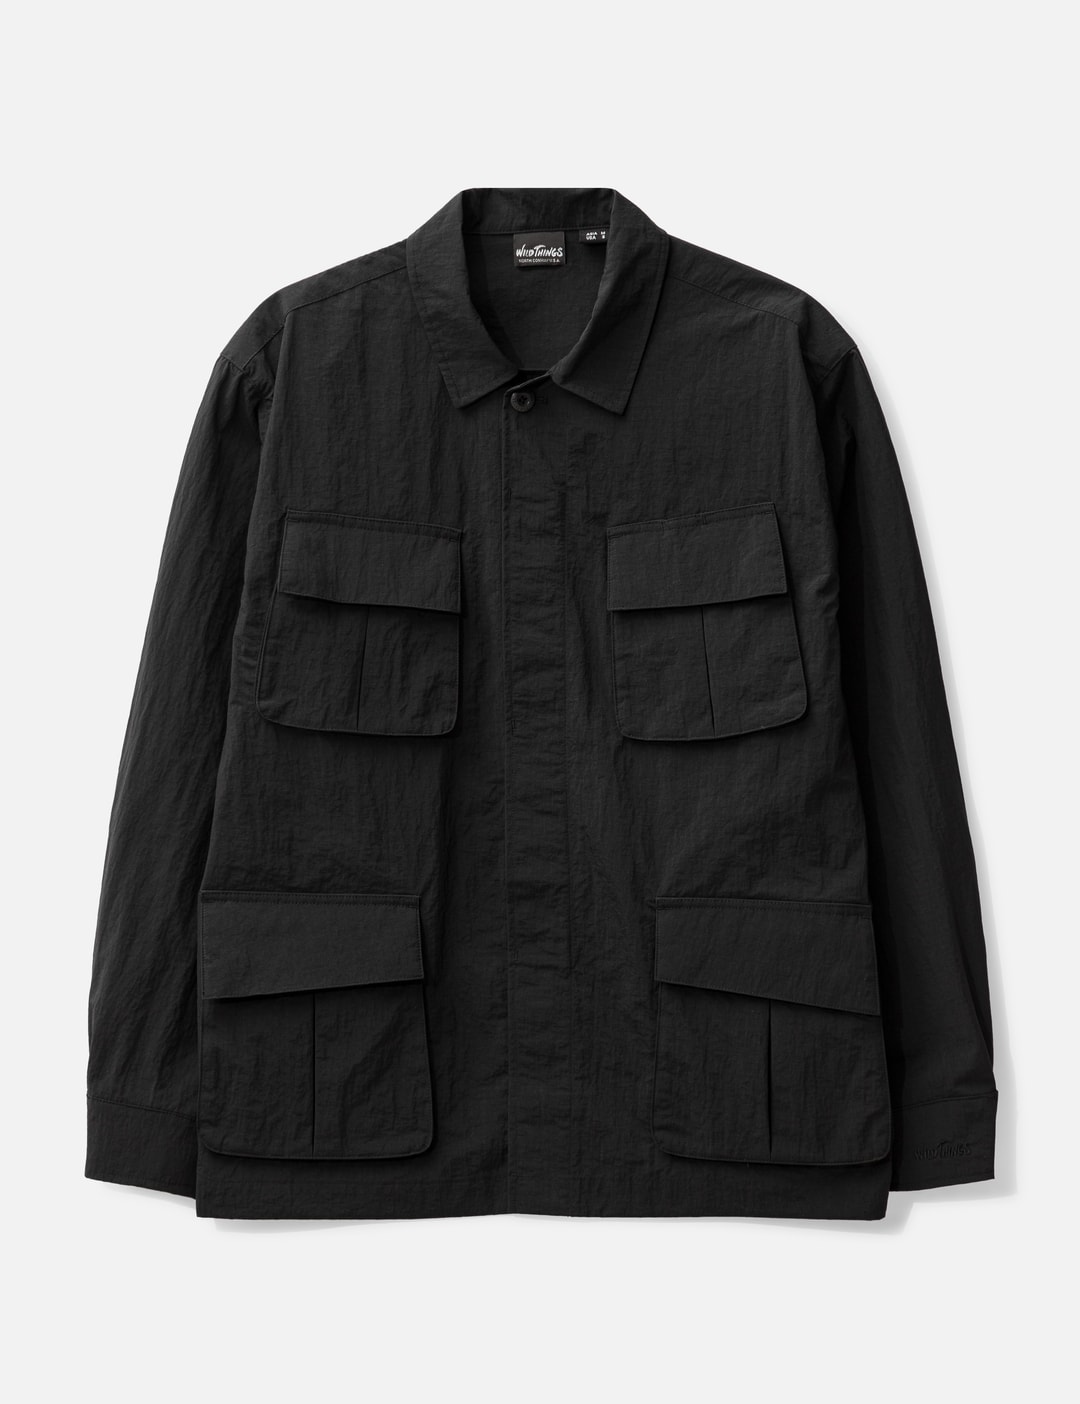 WILD THINGS - BDU Shirts Jacket | HBX - Globally Curated Fashion and ...